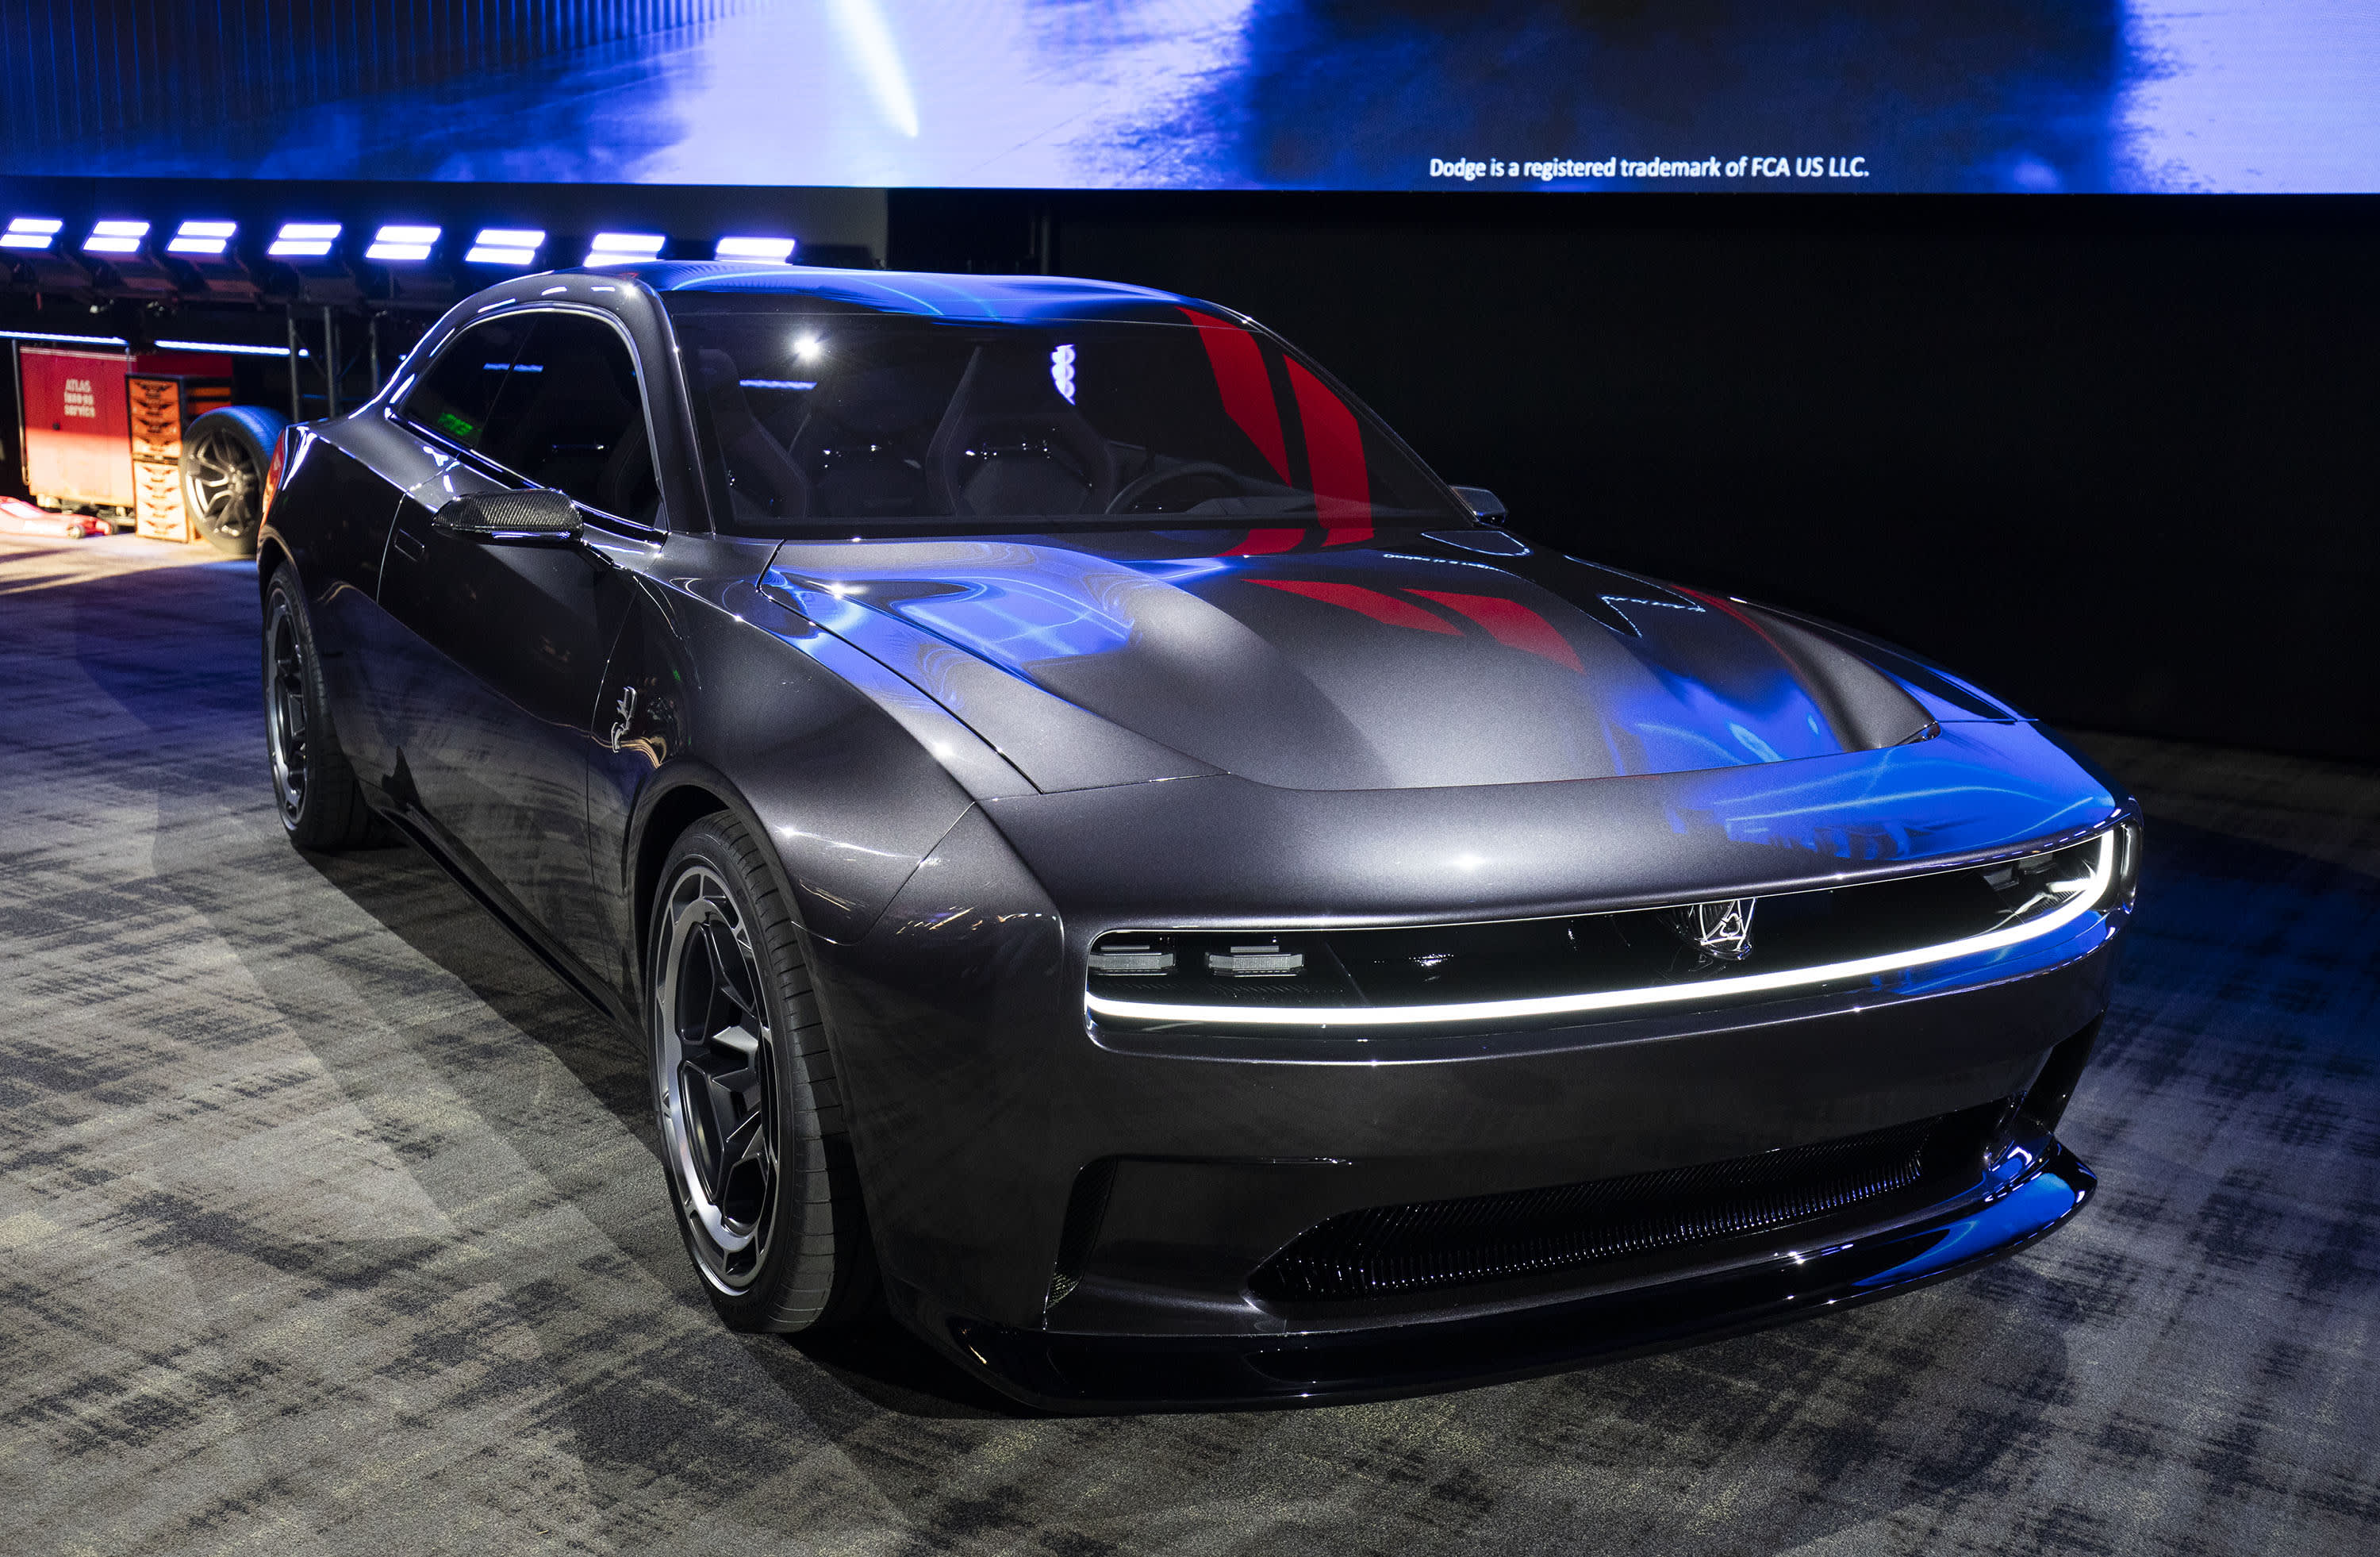 Will Dodge's electric muscle car satisfy its die-hard fans?